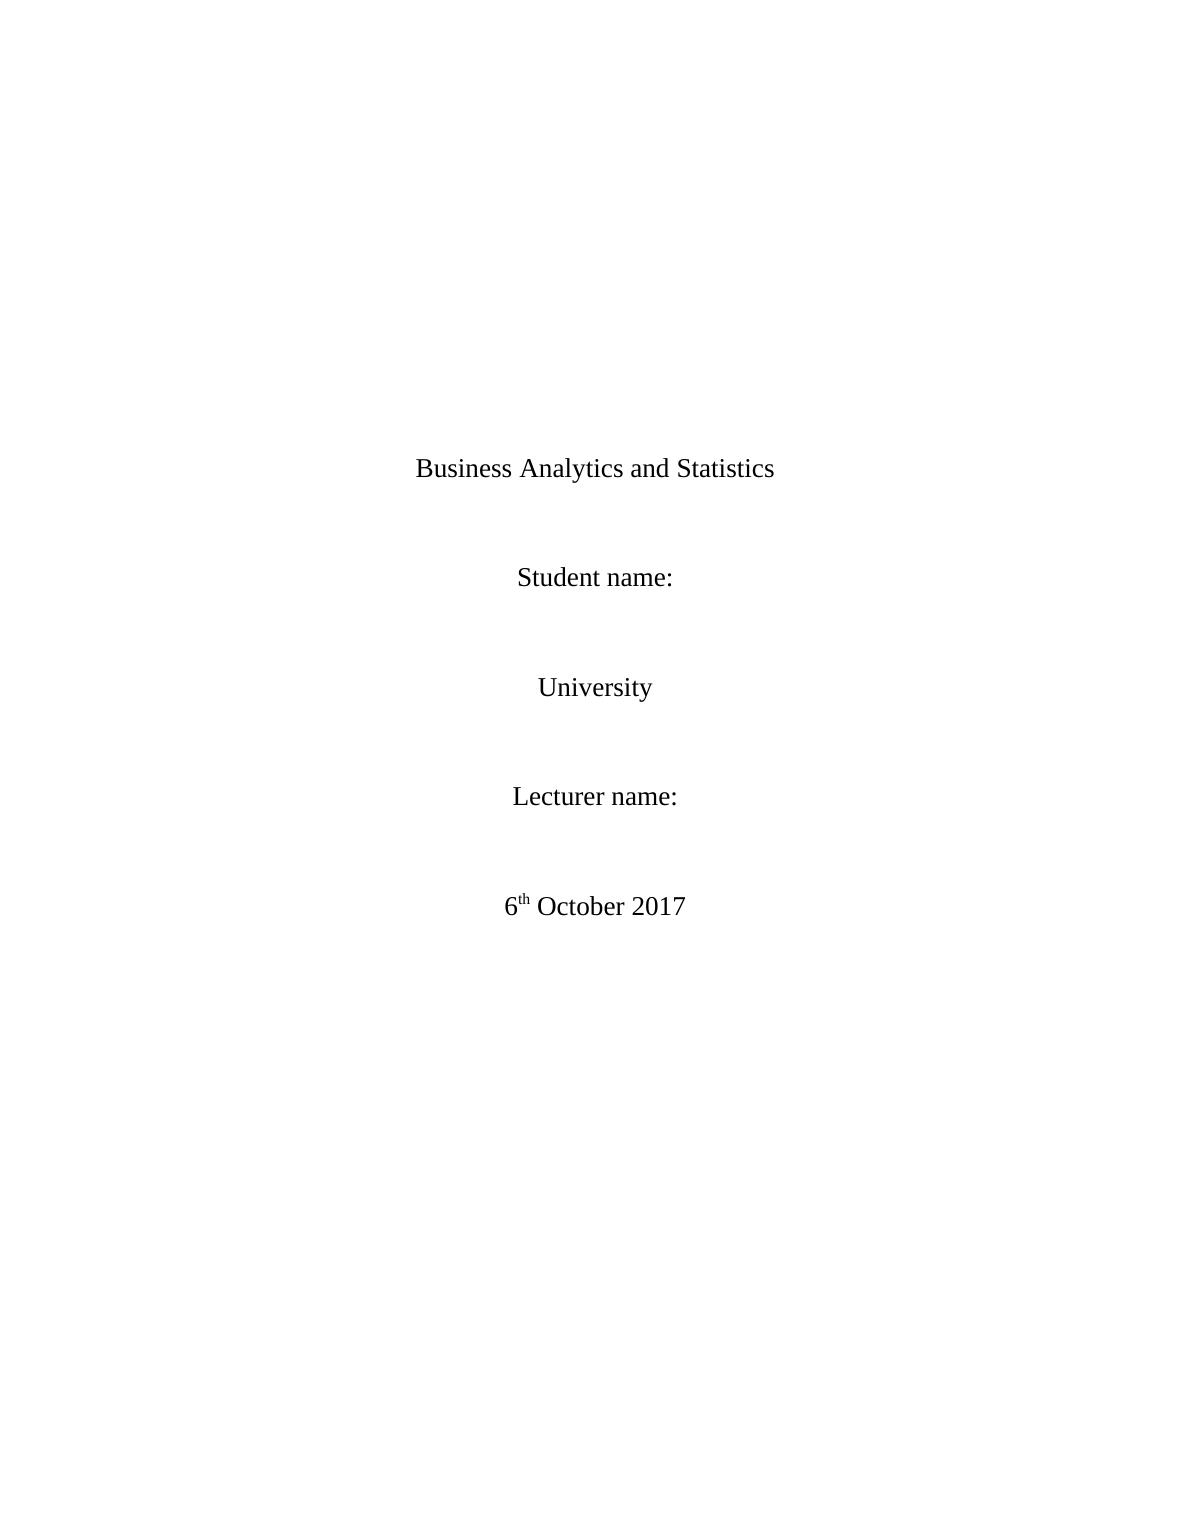 Business Analytics and Statistics Student Name: 6th October 2017 Introduction 3 Problem Definition 3 Analysis and Findings_1